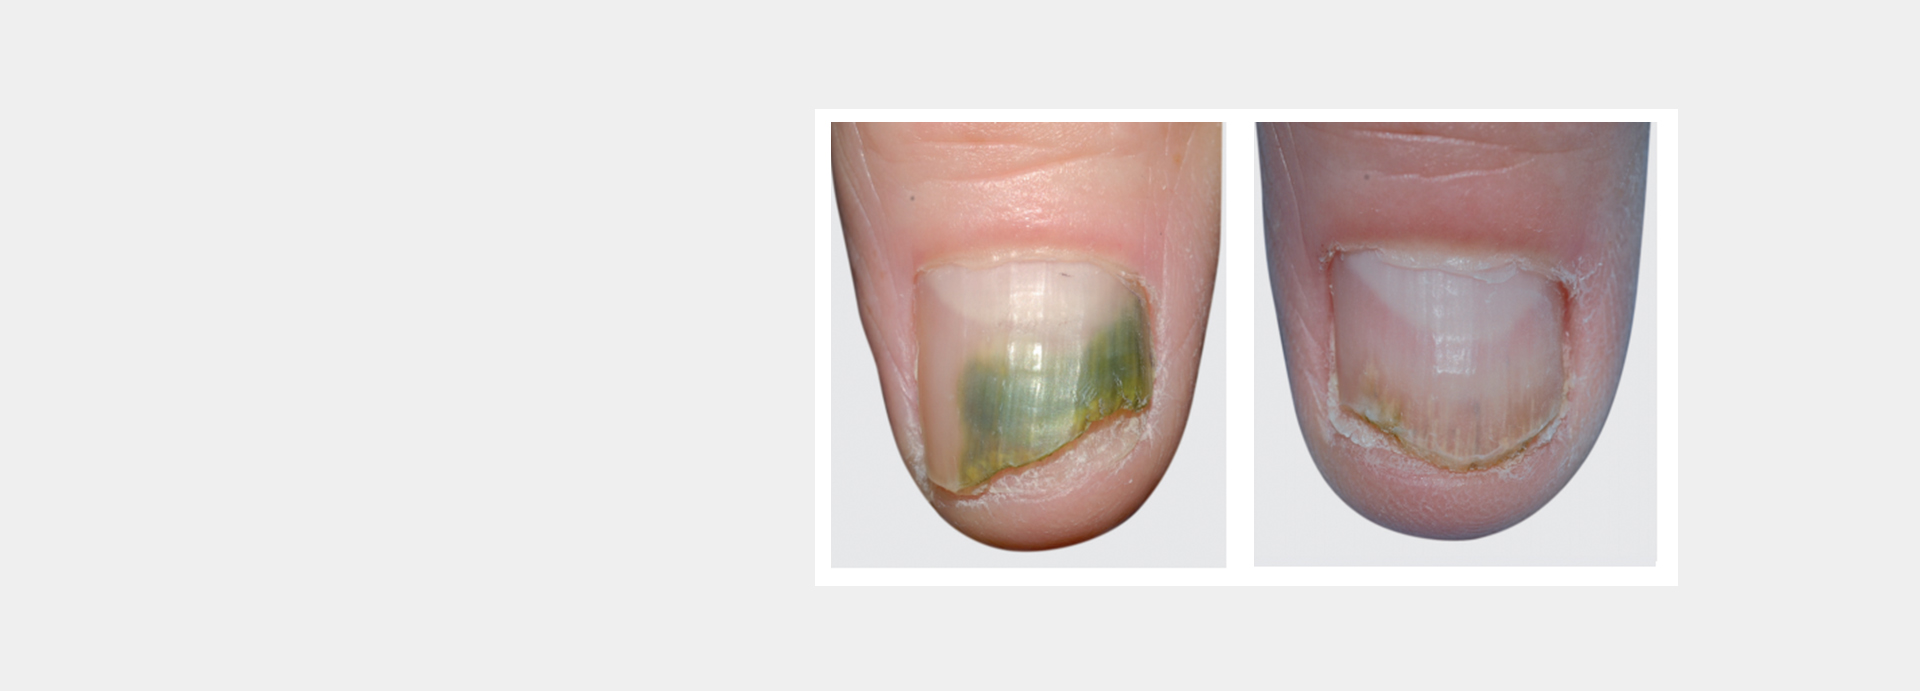 Green Nail Syndrome - What is GNS? How to treat and prevent? – LÓA NAILS